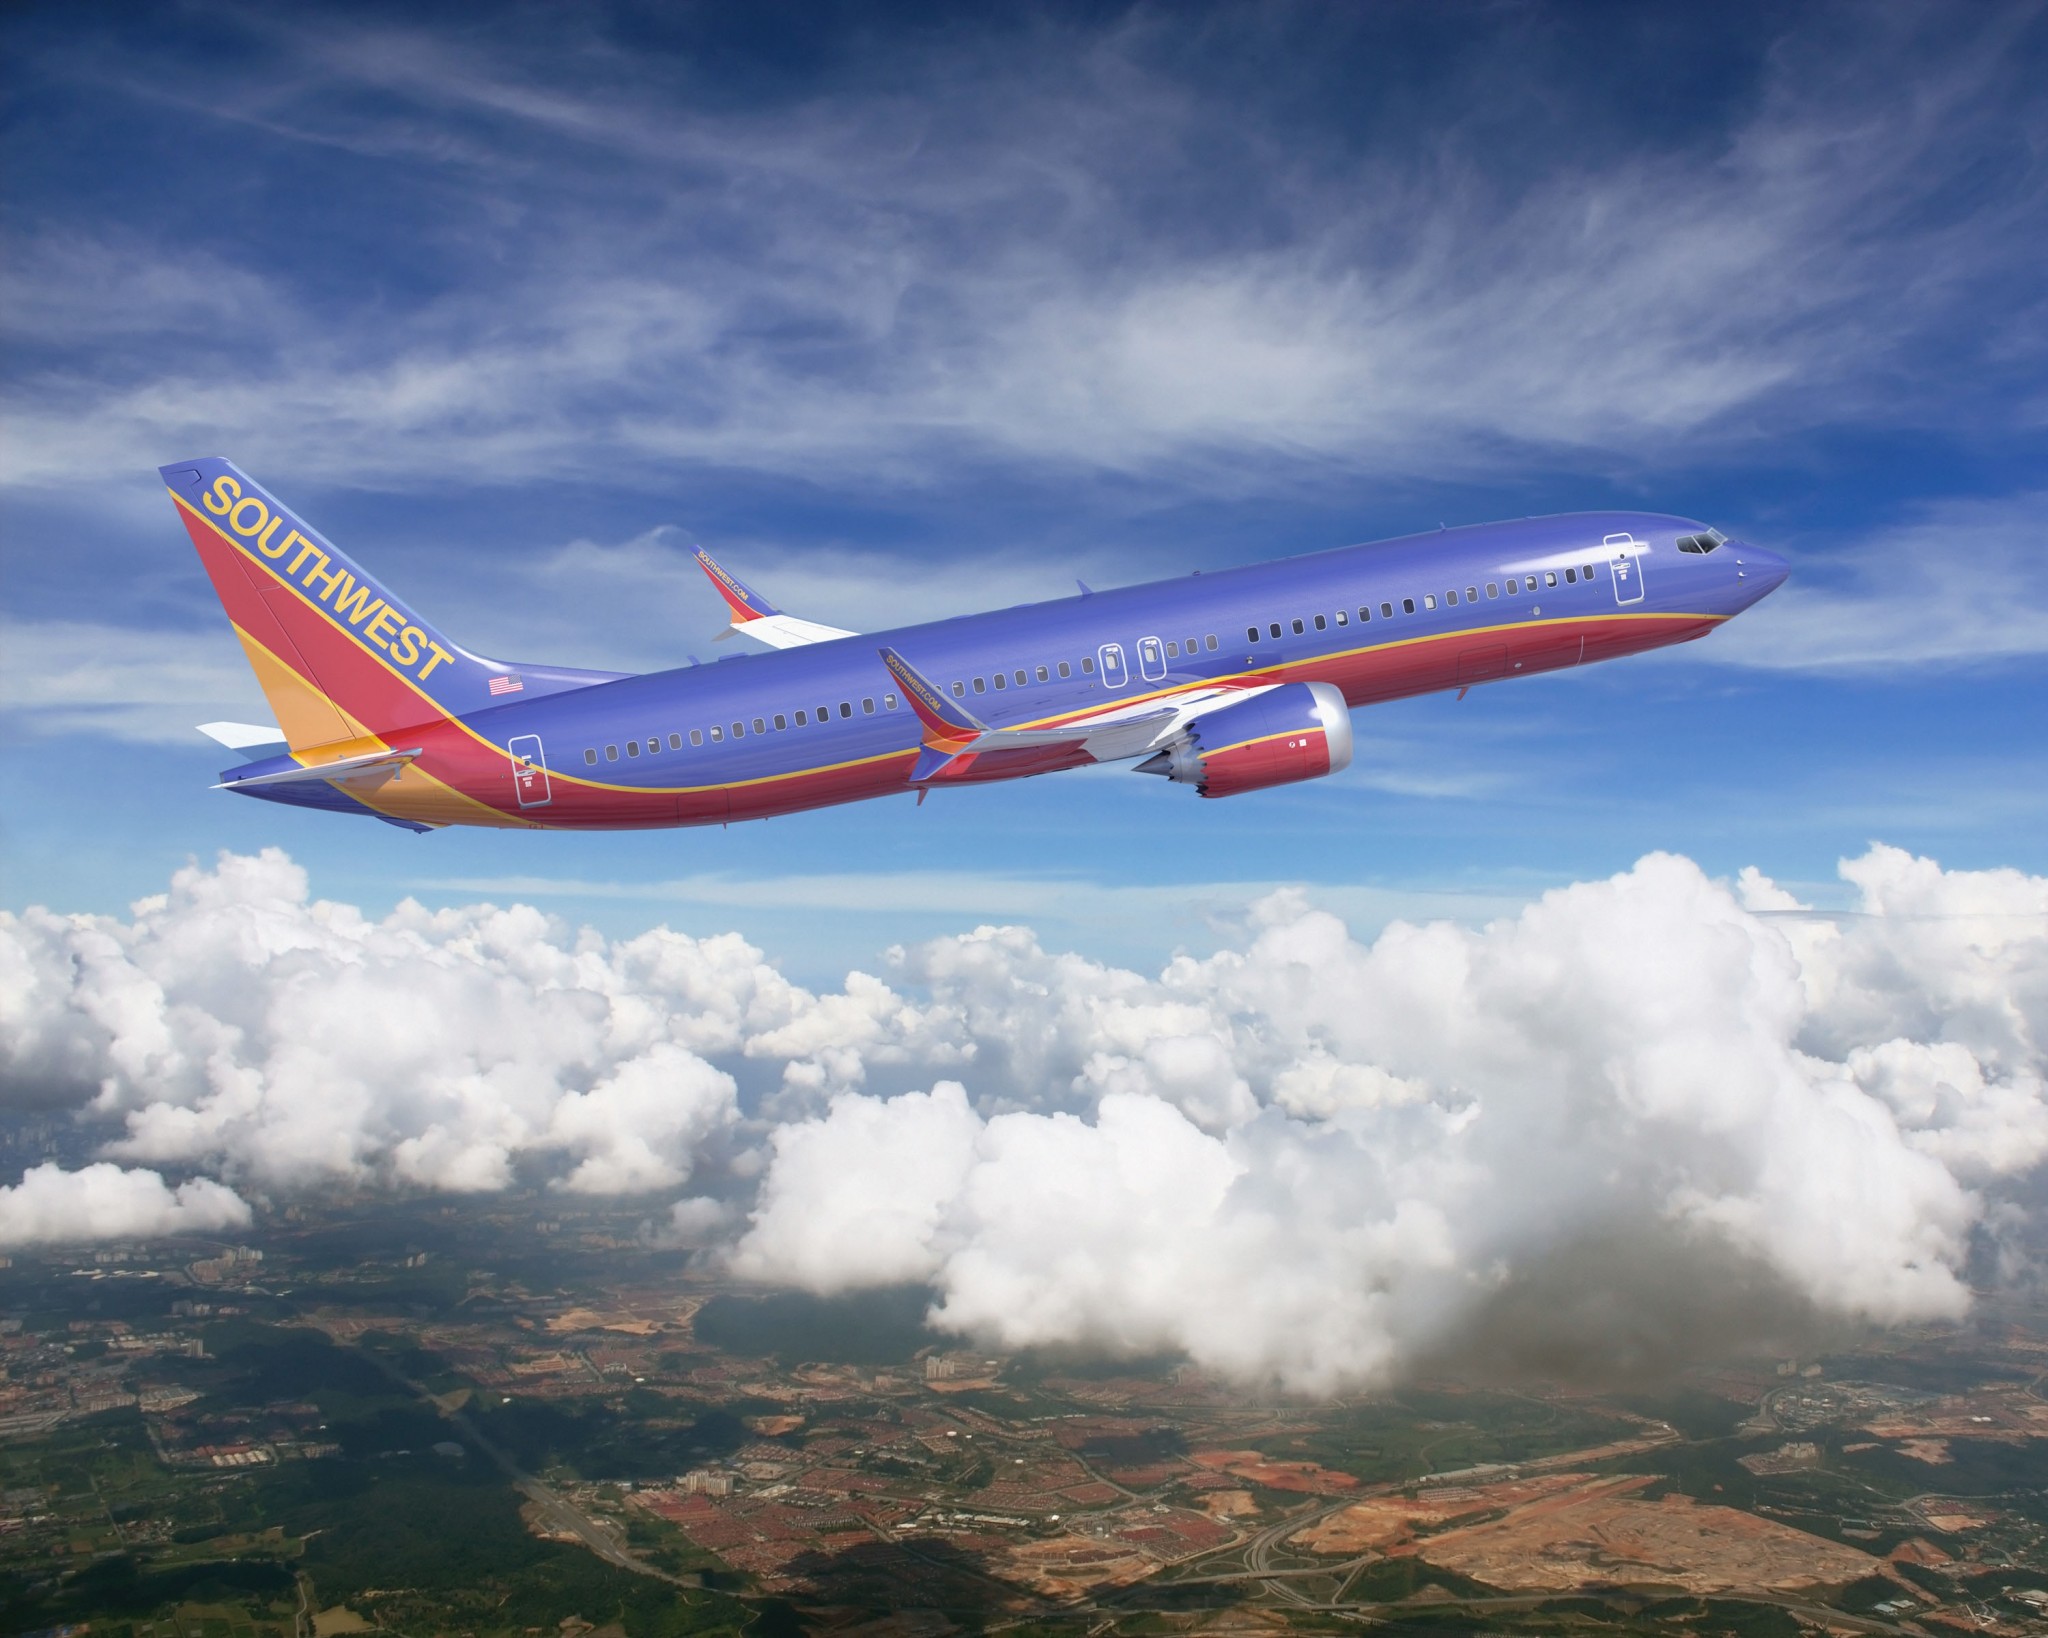 Southwest Airlines facing revenue plunge after cancelling thousands of Christmas flights